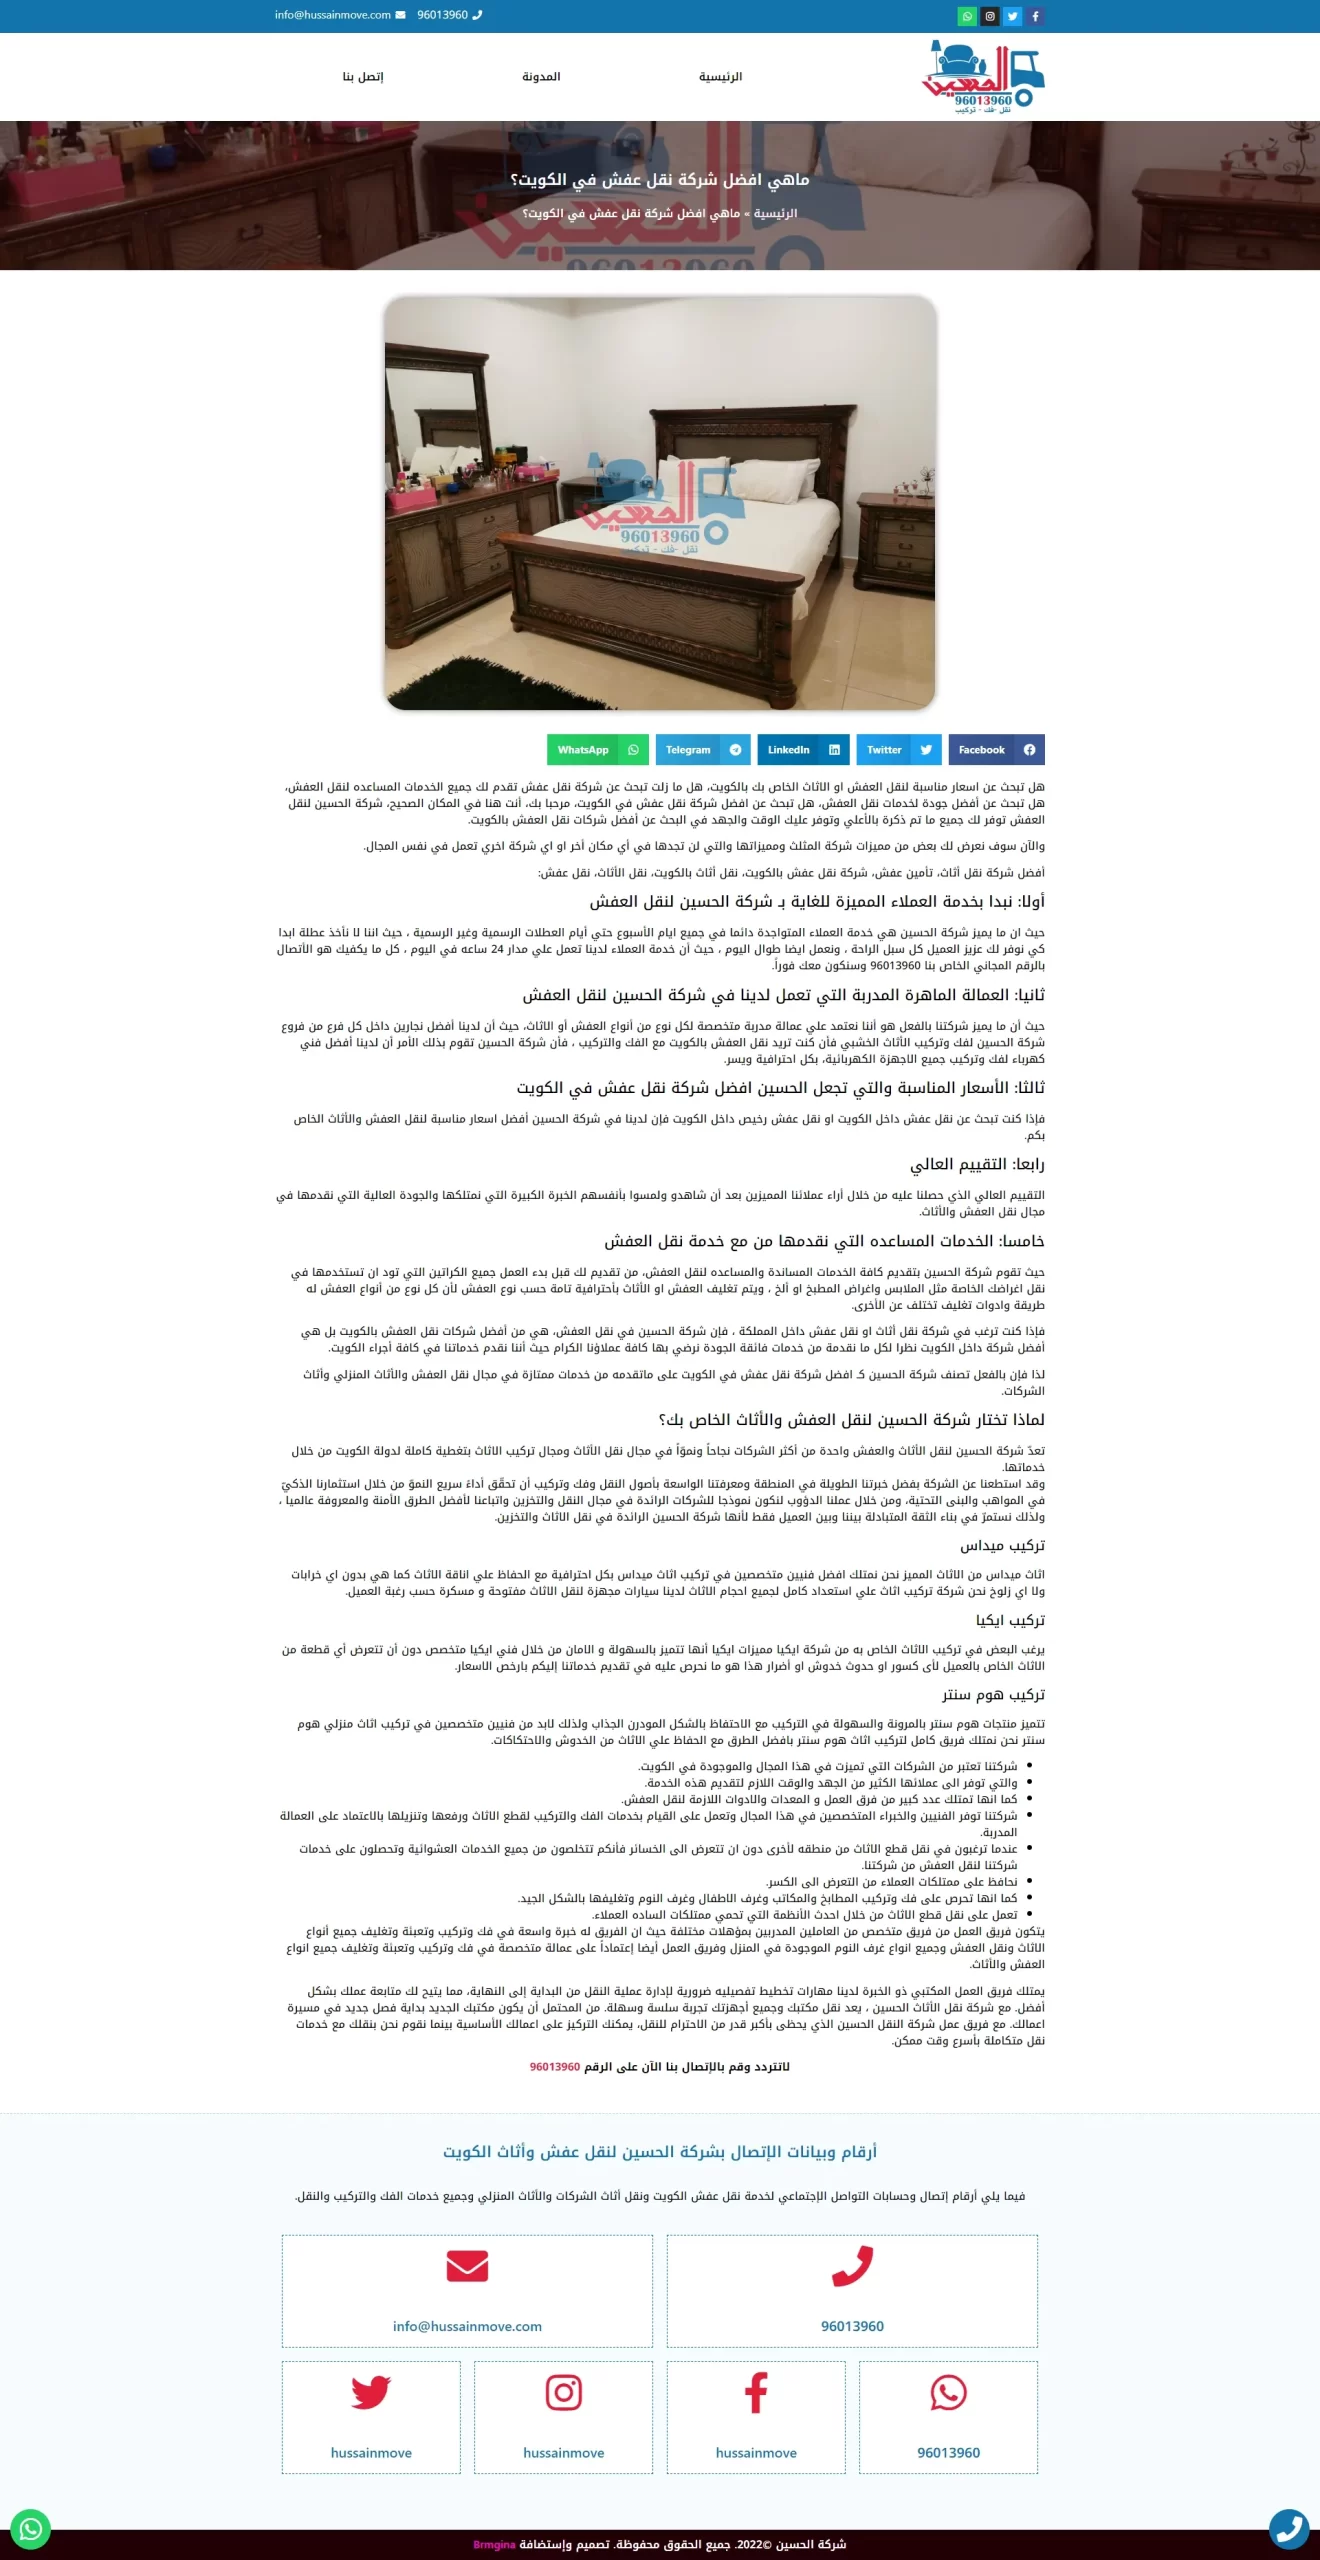 Al-Hussein Company Website for Moving Furniture in Kuwait